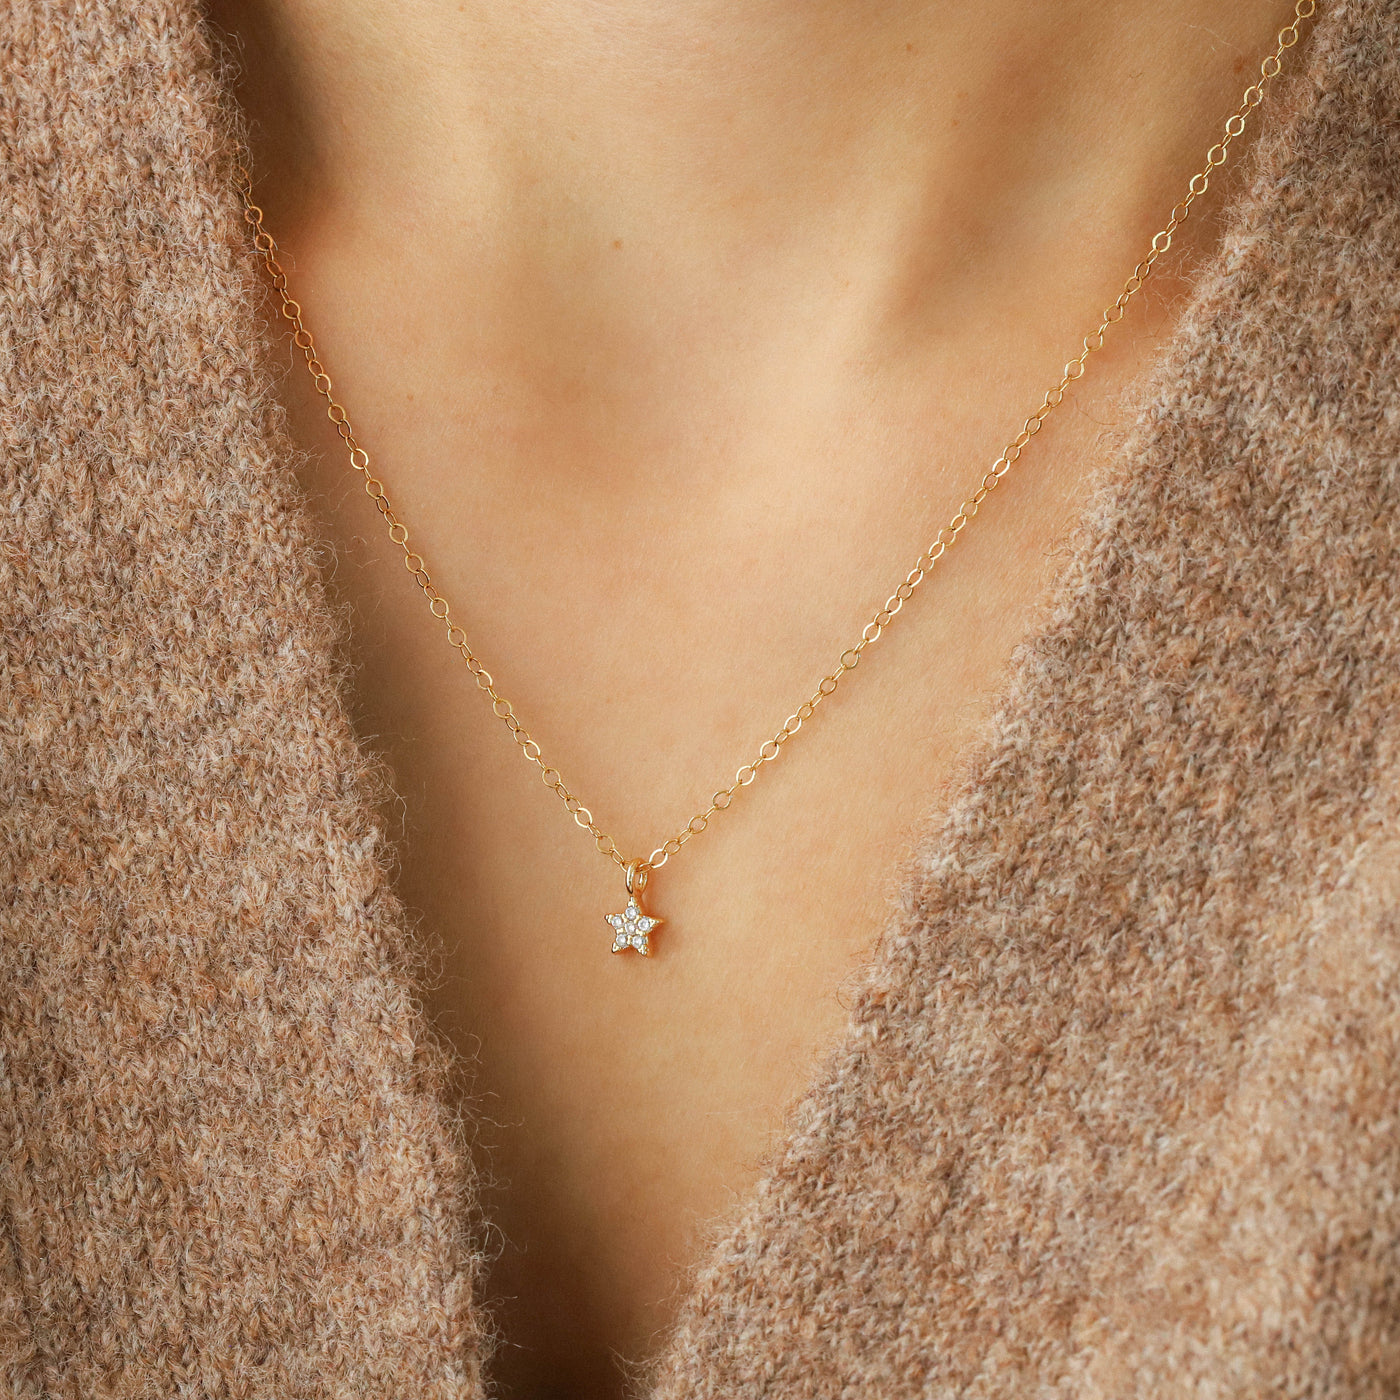 Gold dainty necklace